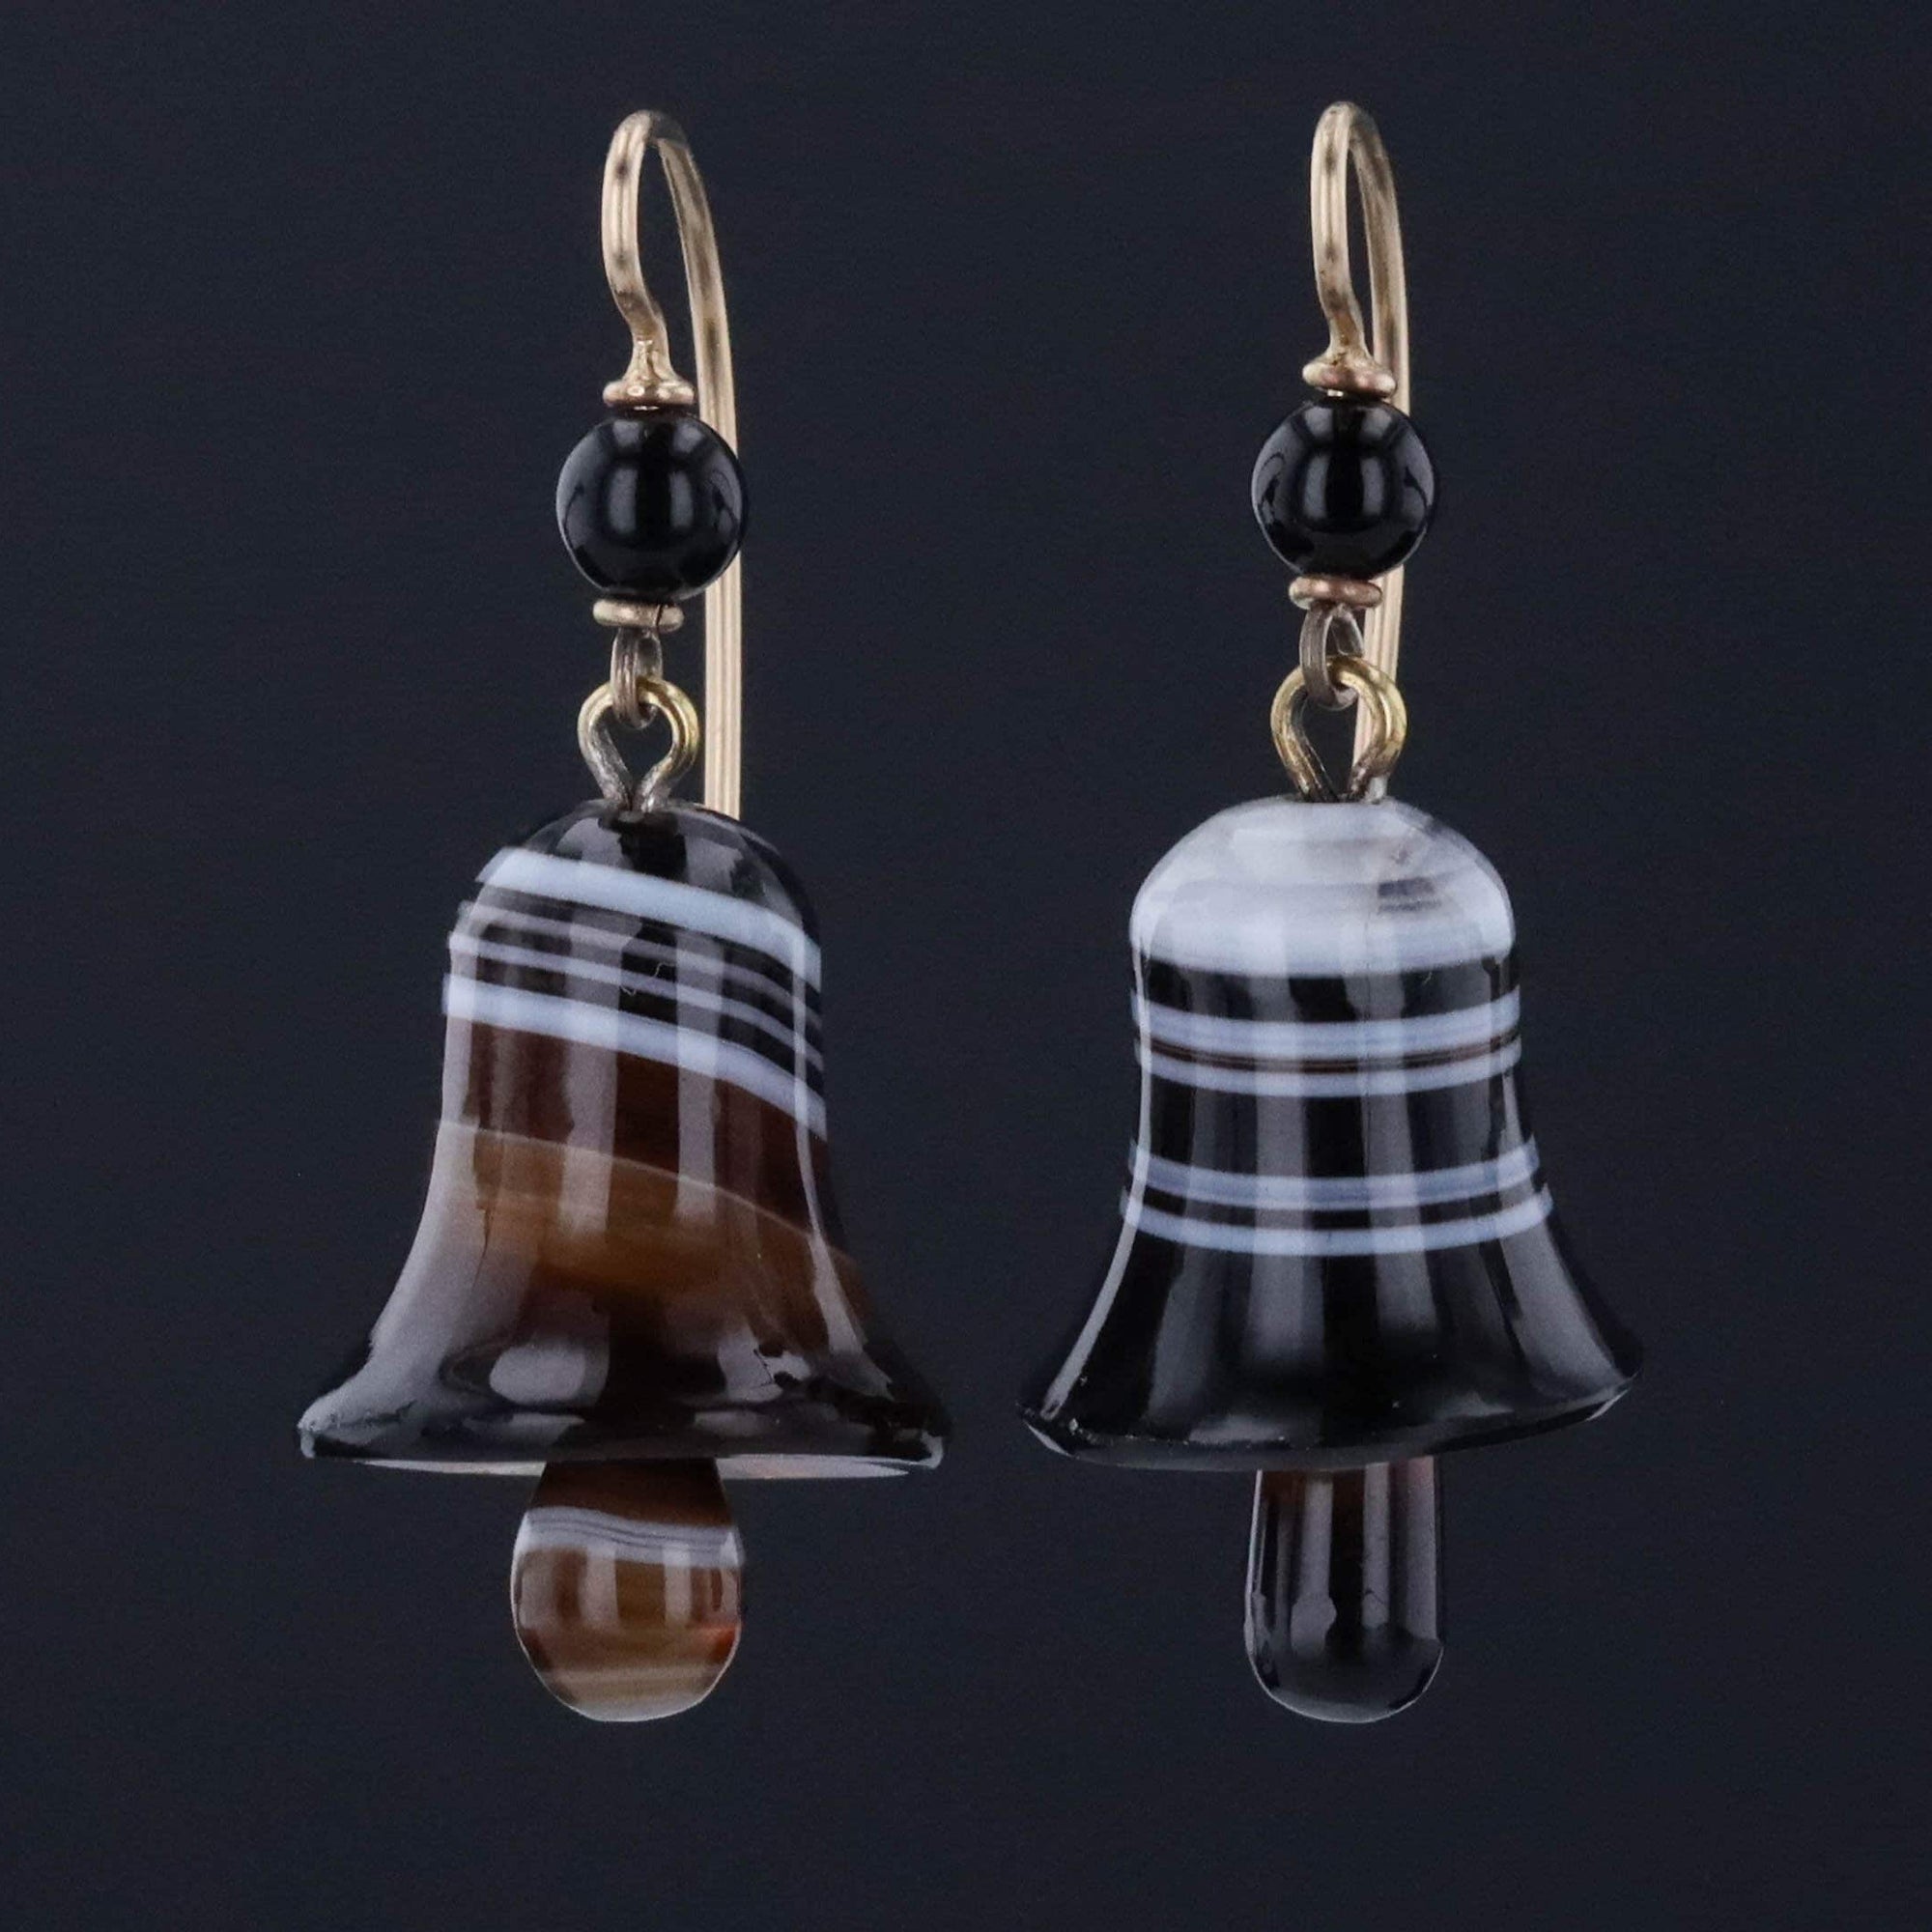 Antique Banded Agate Bell Earrings